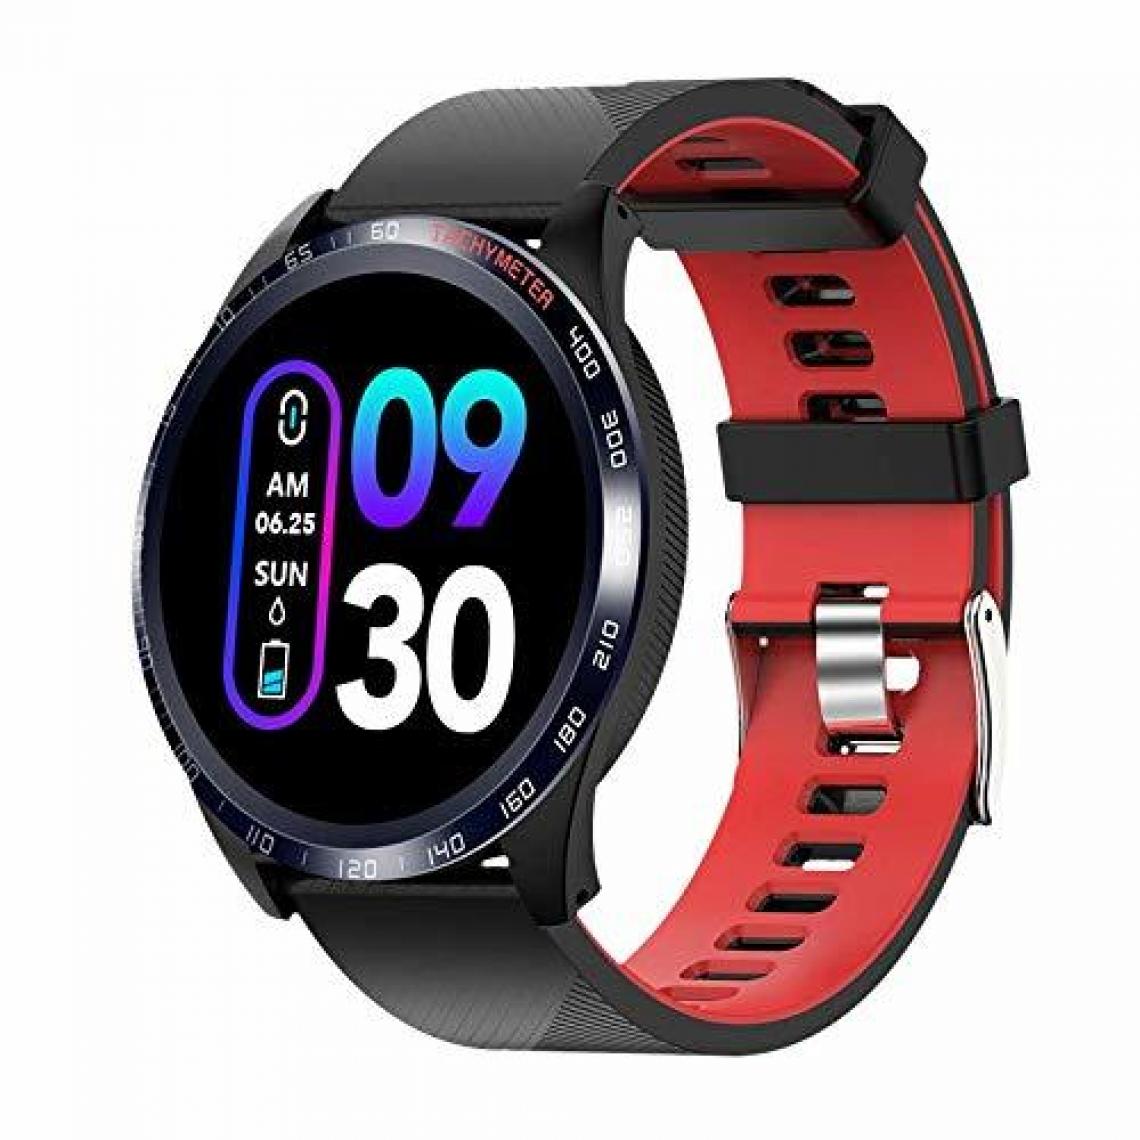 Chronotech Montres - Chronus Smartwatch, Fitness Tracker, Activity Tracker, Smart Band with Colour Display, Heart Rate and Blood Pressure Measurements, Sleep Monitor, Calorie Counter, Step Counter(black) - Montre connectée